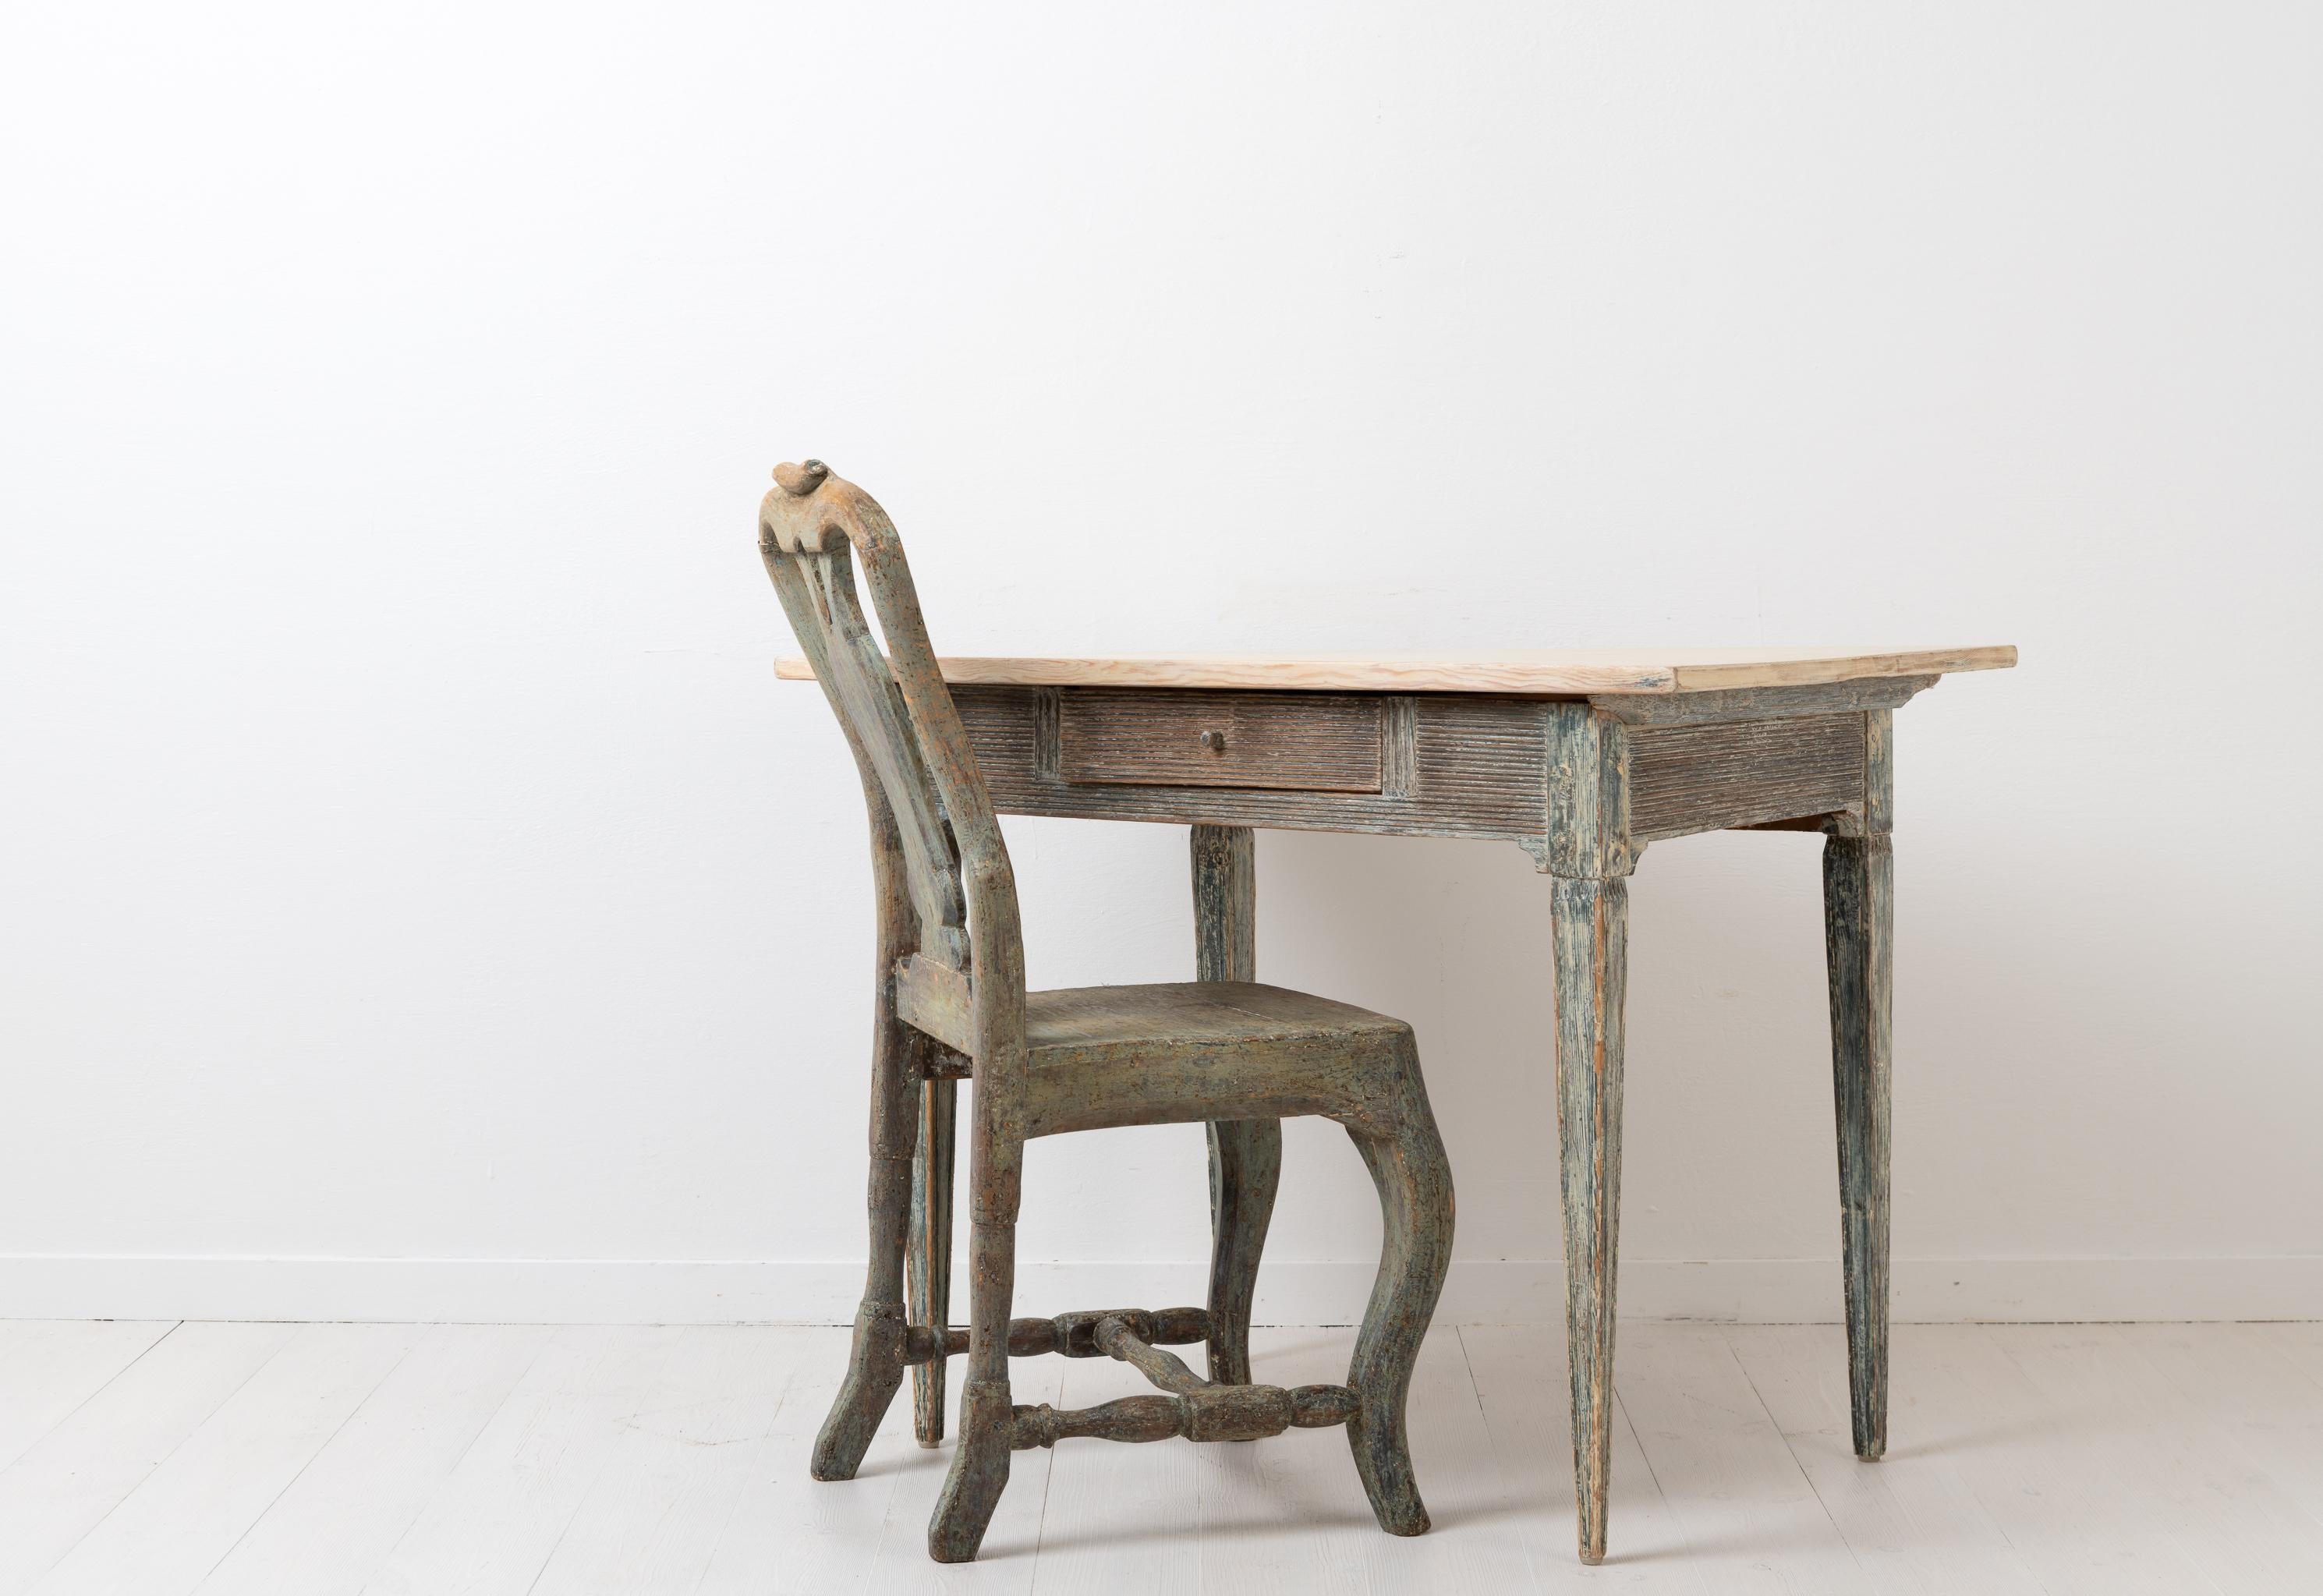 Desk or wall table from the Swedish gustavian period during the late 18th century. The desk is from northern Sweden and work well as both a desk and wall table, the Swedish gustavian period correlates with the more International neoclassical era so